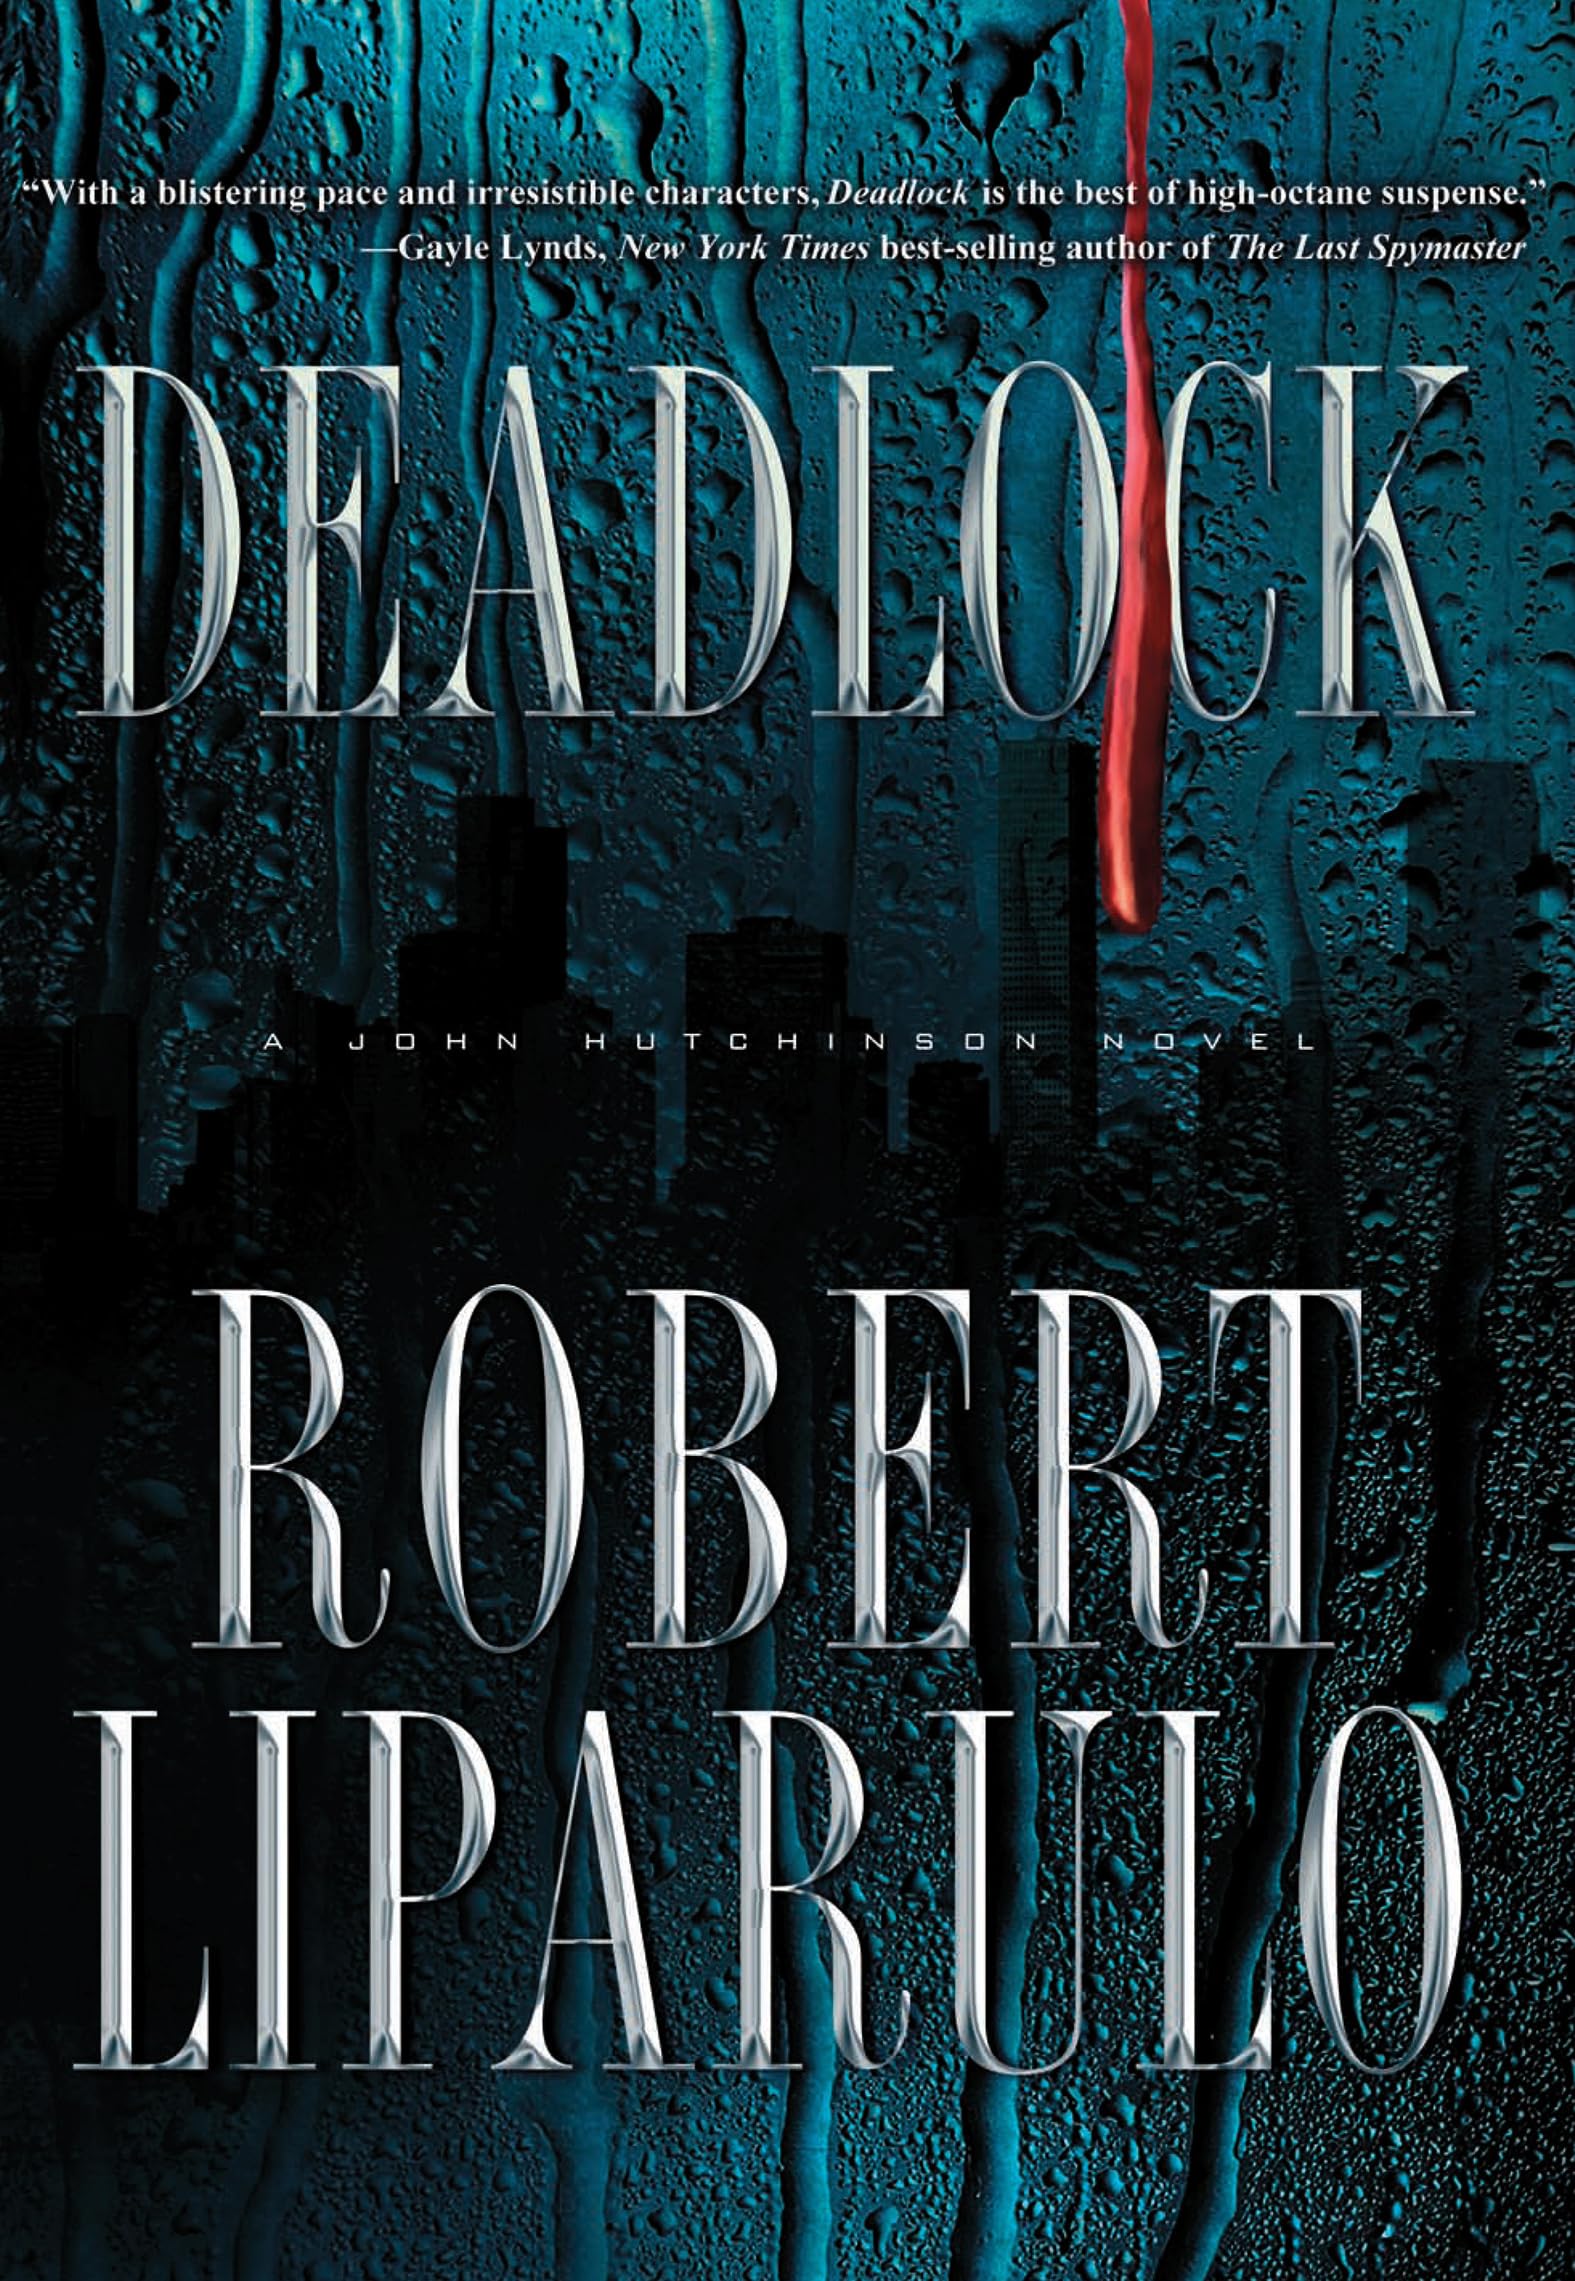 Books in Order: A Comprehensive Guide to Robert Liparulo’s Bestselling Titles